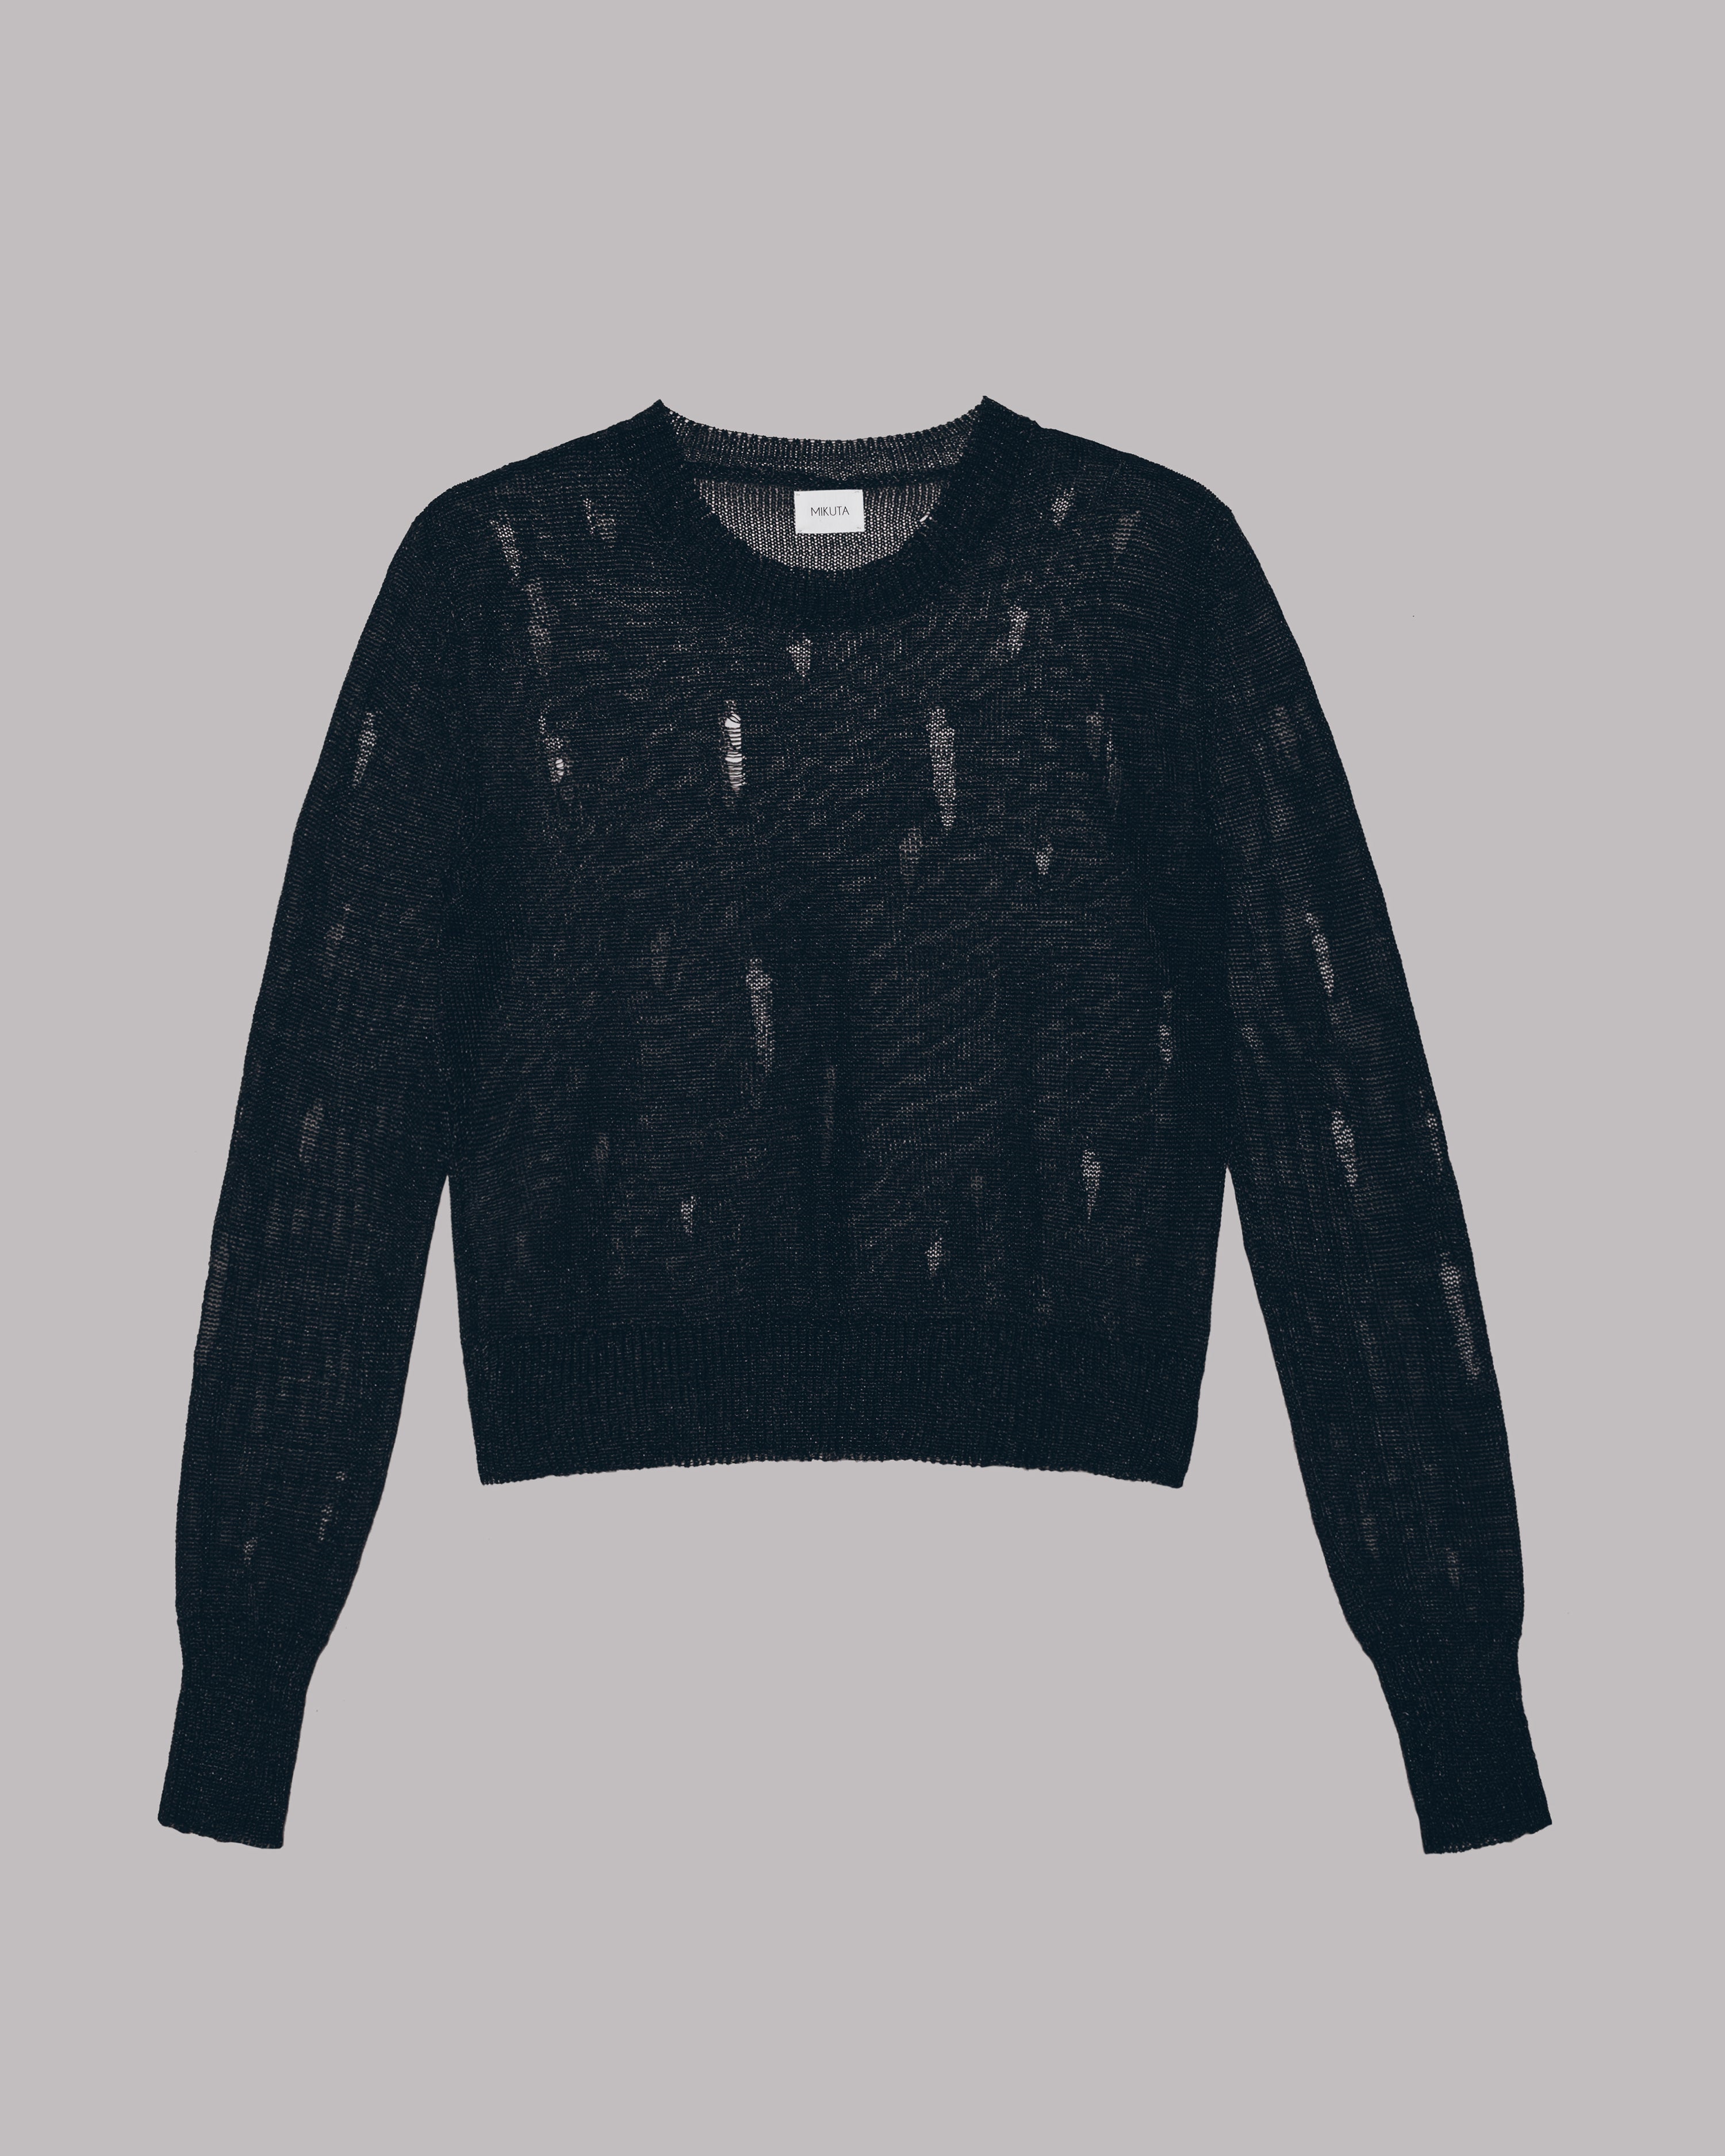 The Black Metallic Distressed Knitted Sweater